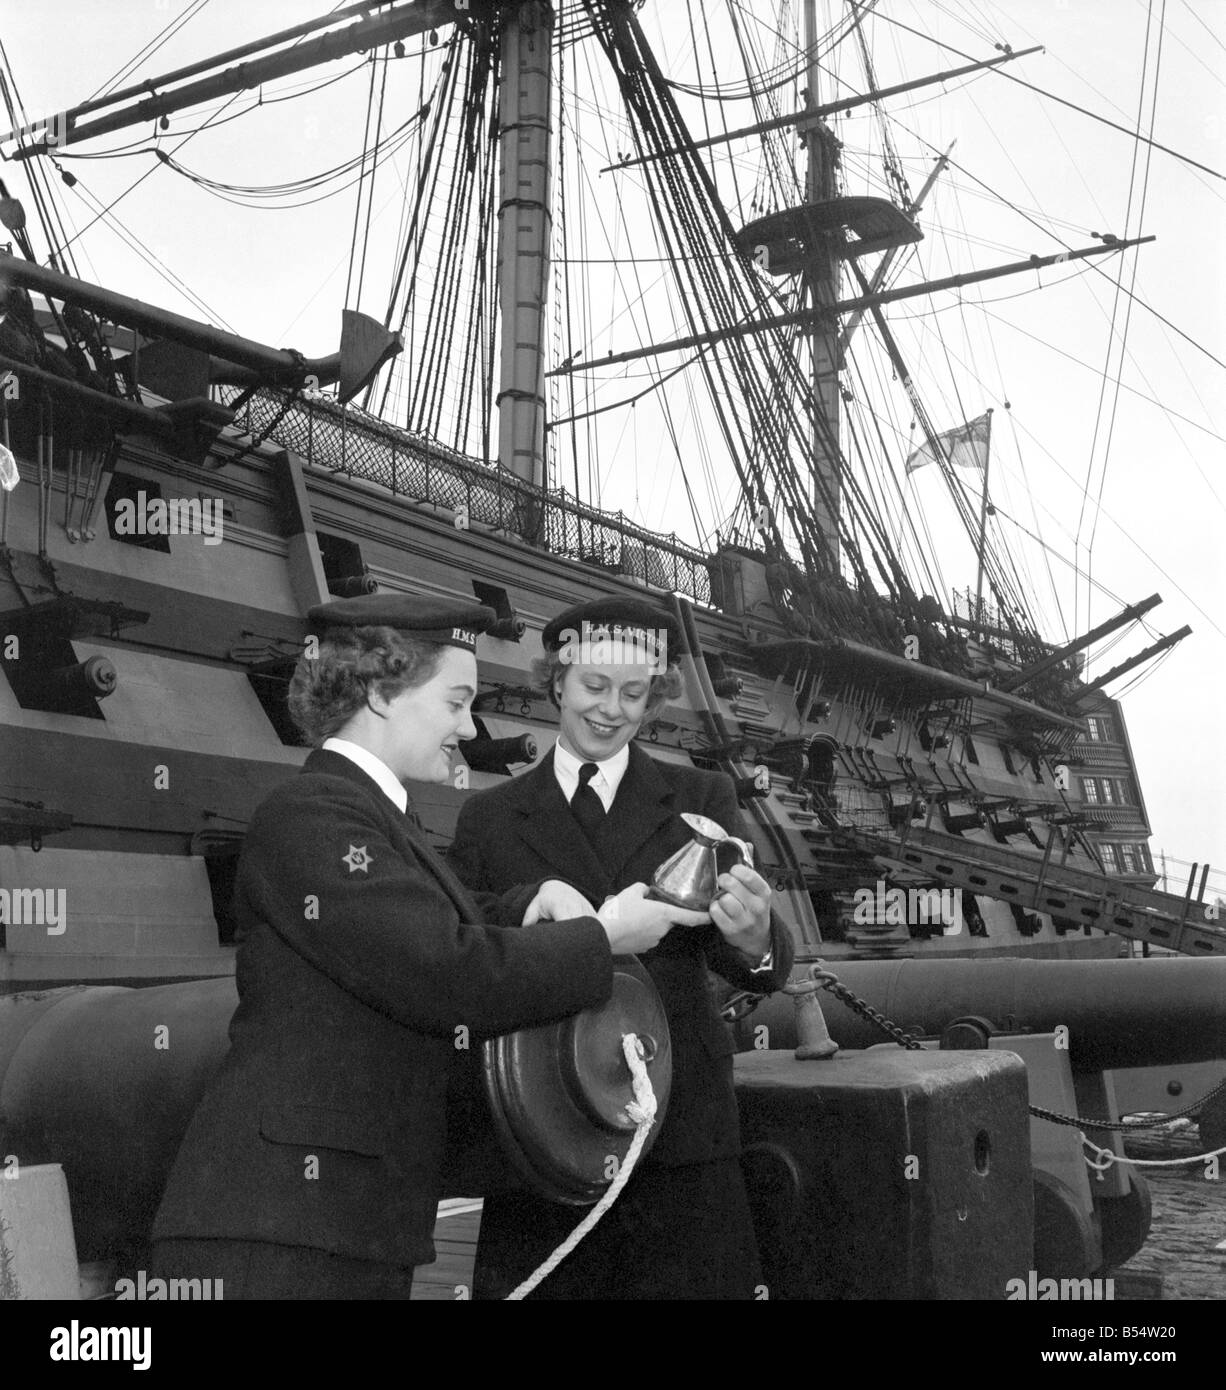 Royal Navy HMS Victory: WREN Margaret Mann 19 a winter in the navy, and Wren Joan Wallen age 20 of Radar Dept. They are intersted in a rum measure used aboard. The victory in Nelson days. October 1953 D615-001 Stock Photo